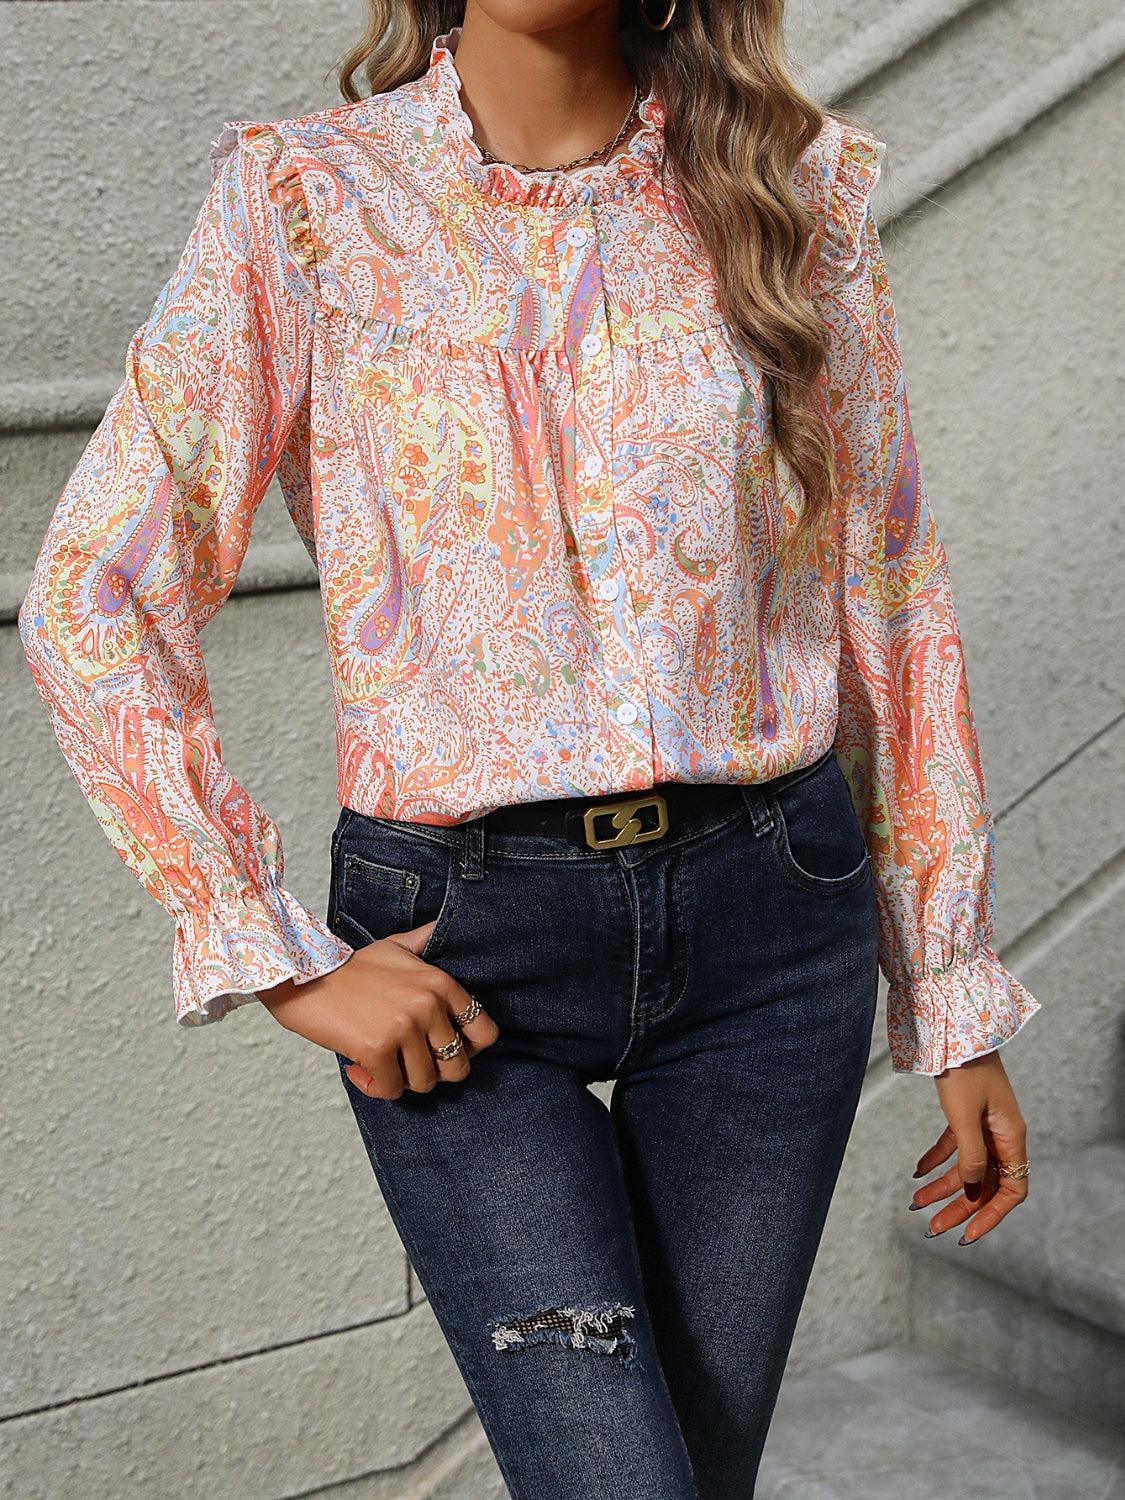 a woman in jeans and a blouse posing for a picture